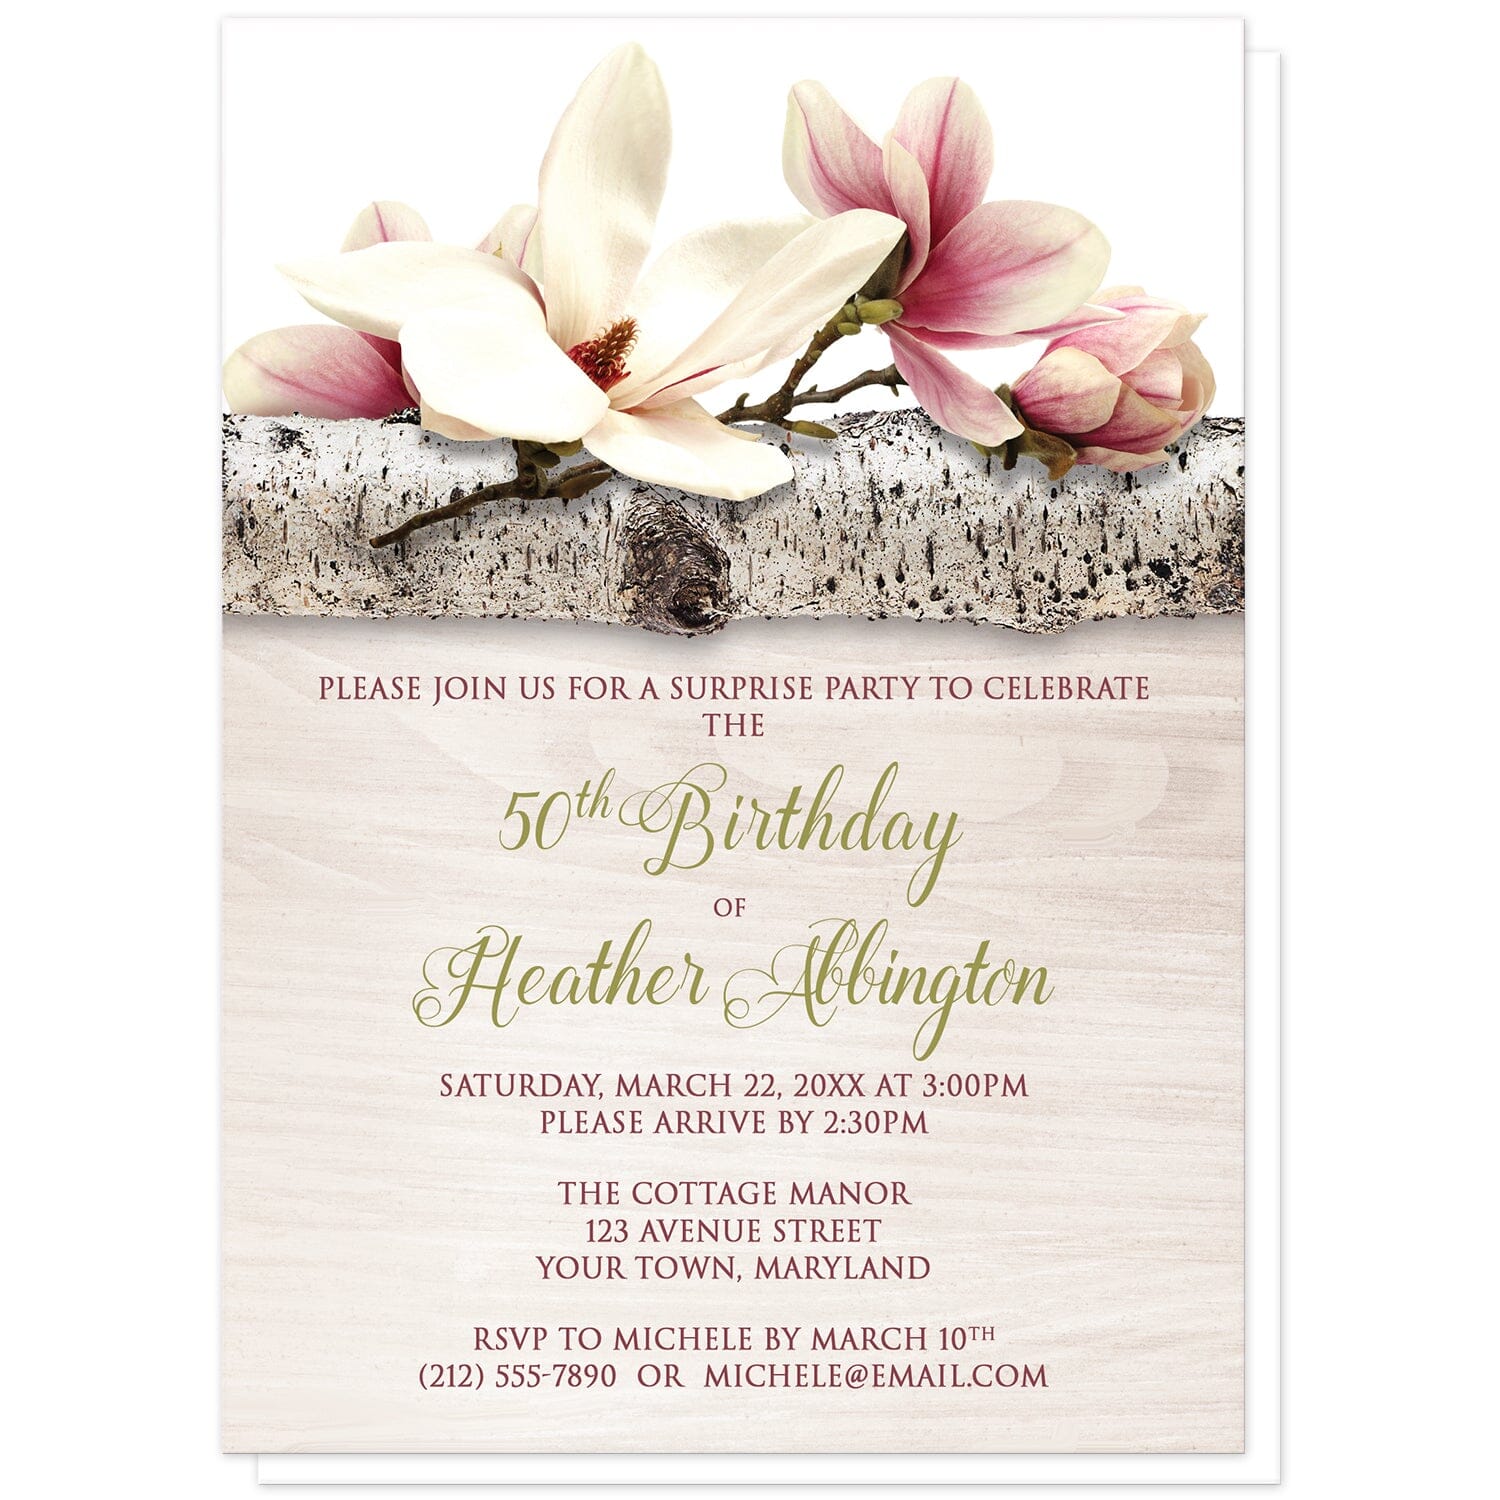 Magnolia Birch Light Wood Floral Birthday Invitations at Artistically Invited. Beautiful magnolia birch light wood floral birthday invitations with pink and white magnolia flowers laying on a birch tree branch along the top. Your personalized birthday party details are custom printed in dark pink and light olive green over a light wood background illustration. 